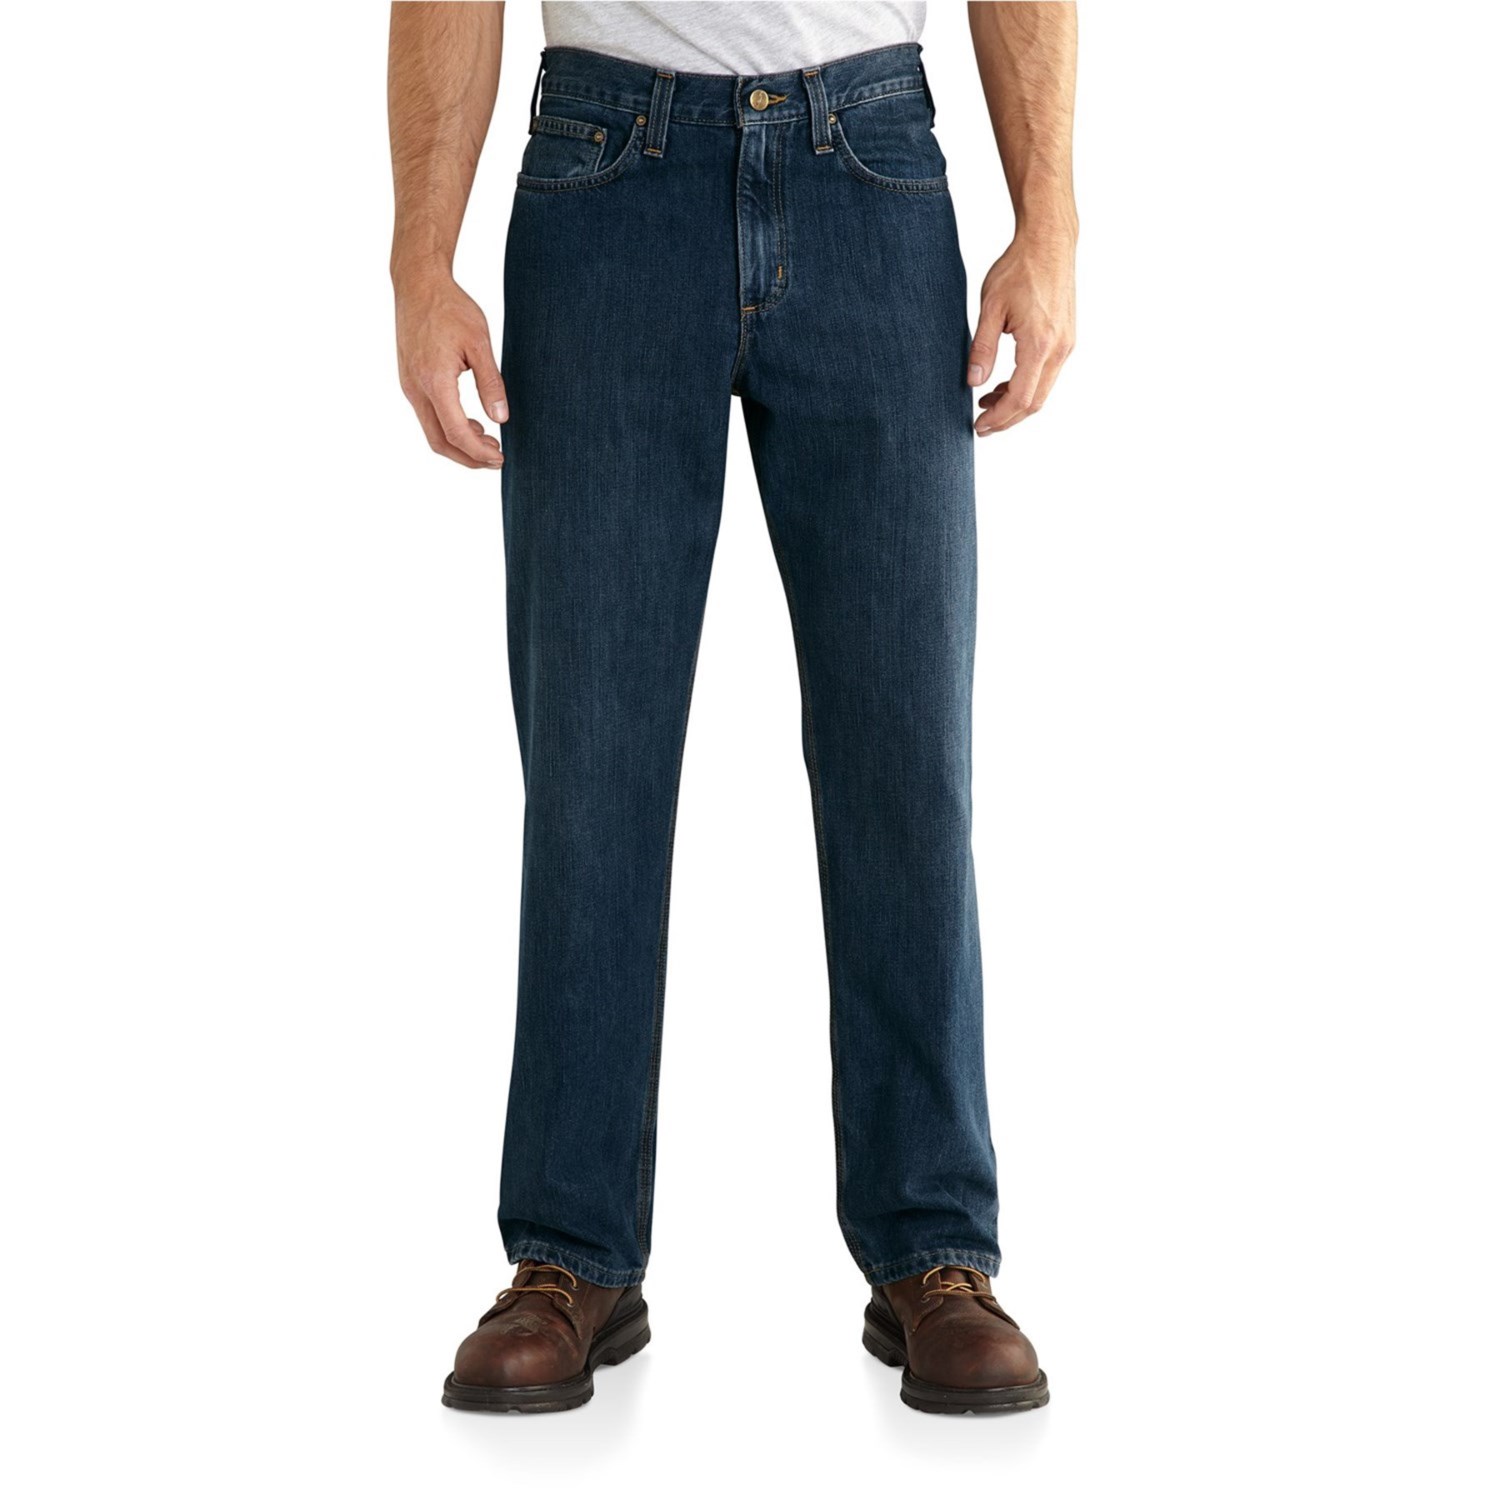 Carhartt 101483 Holter Relaxed Fit Jeans